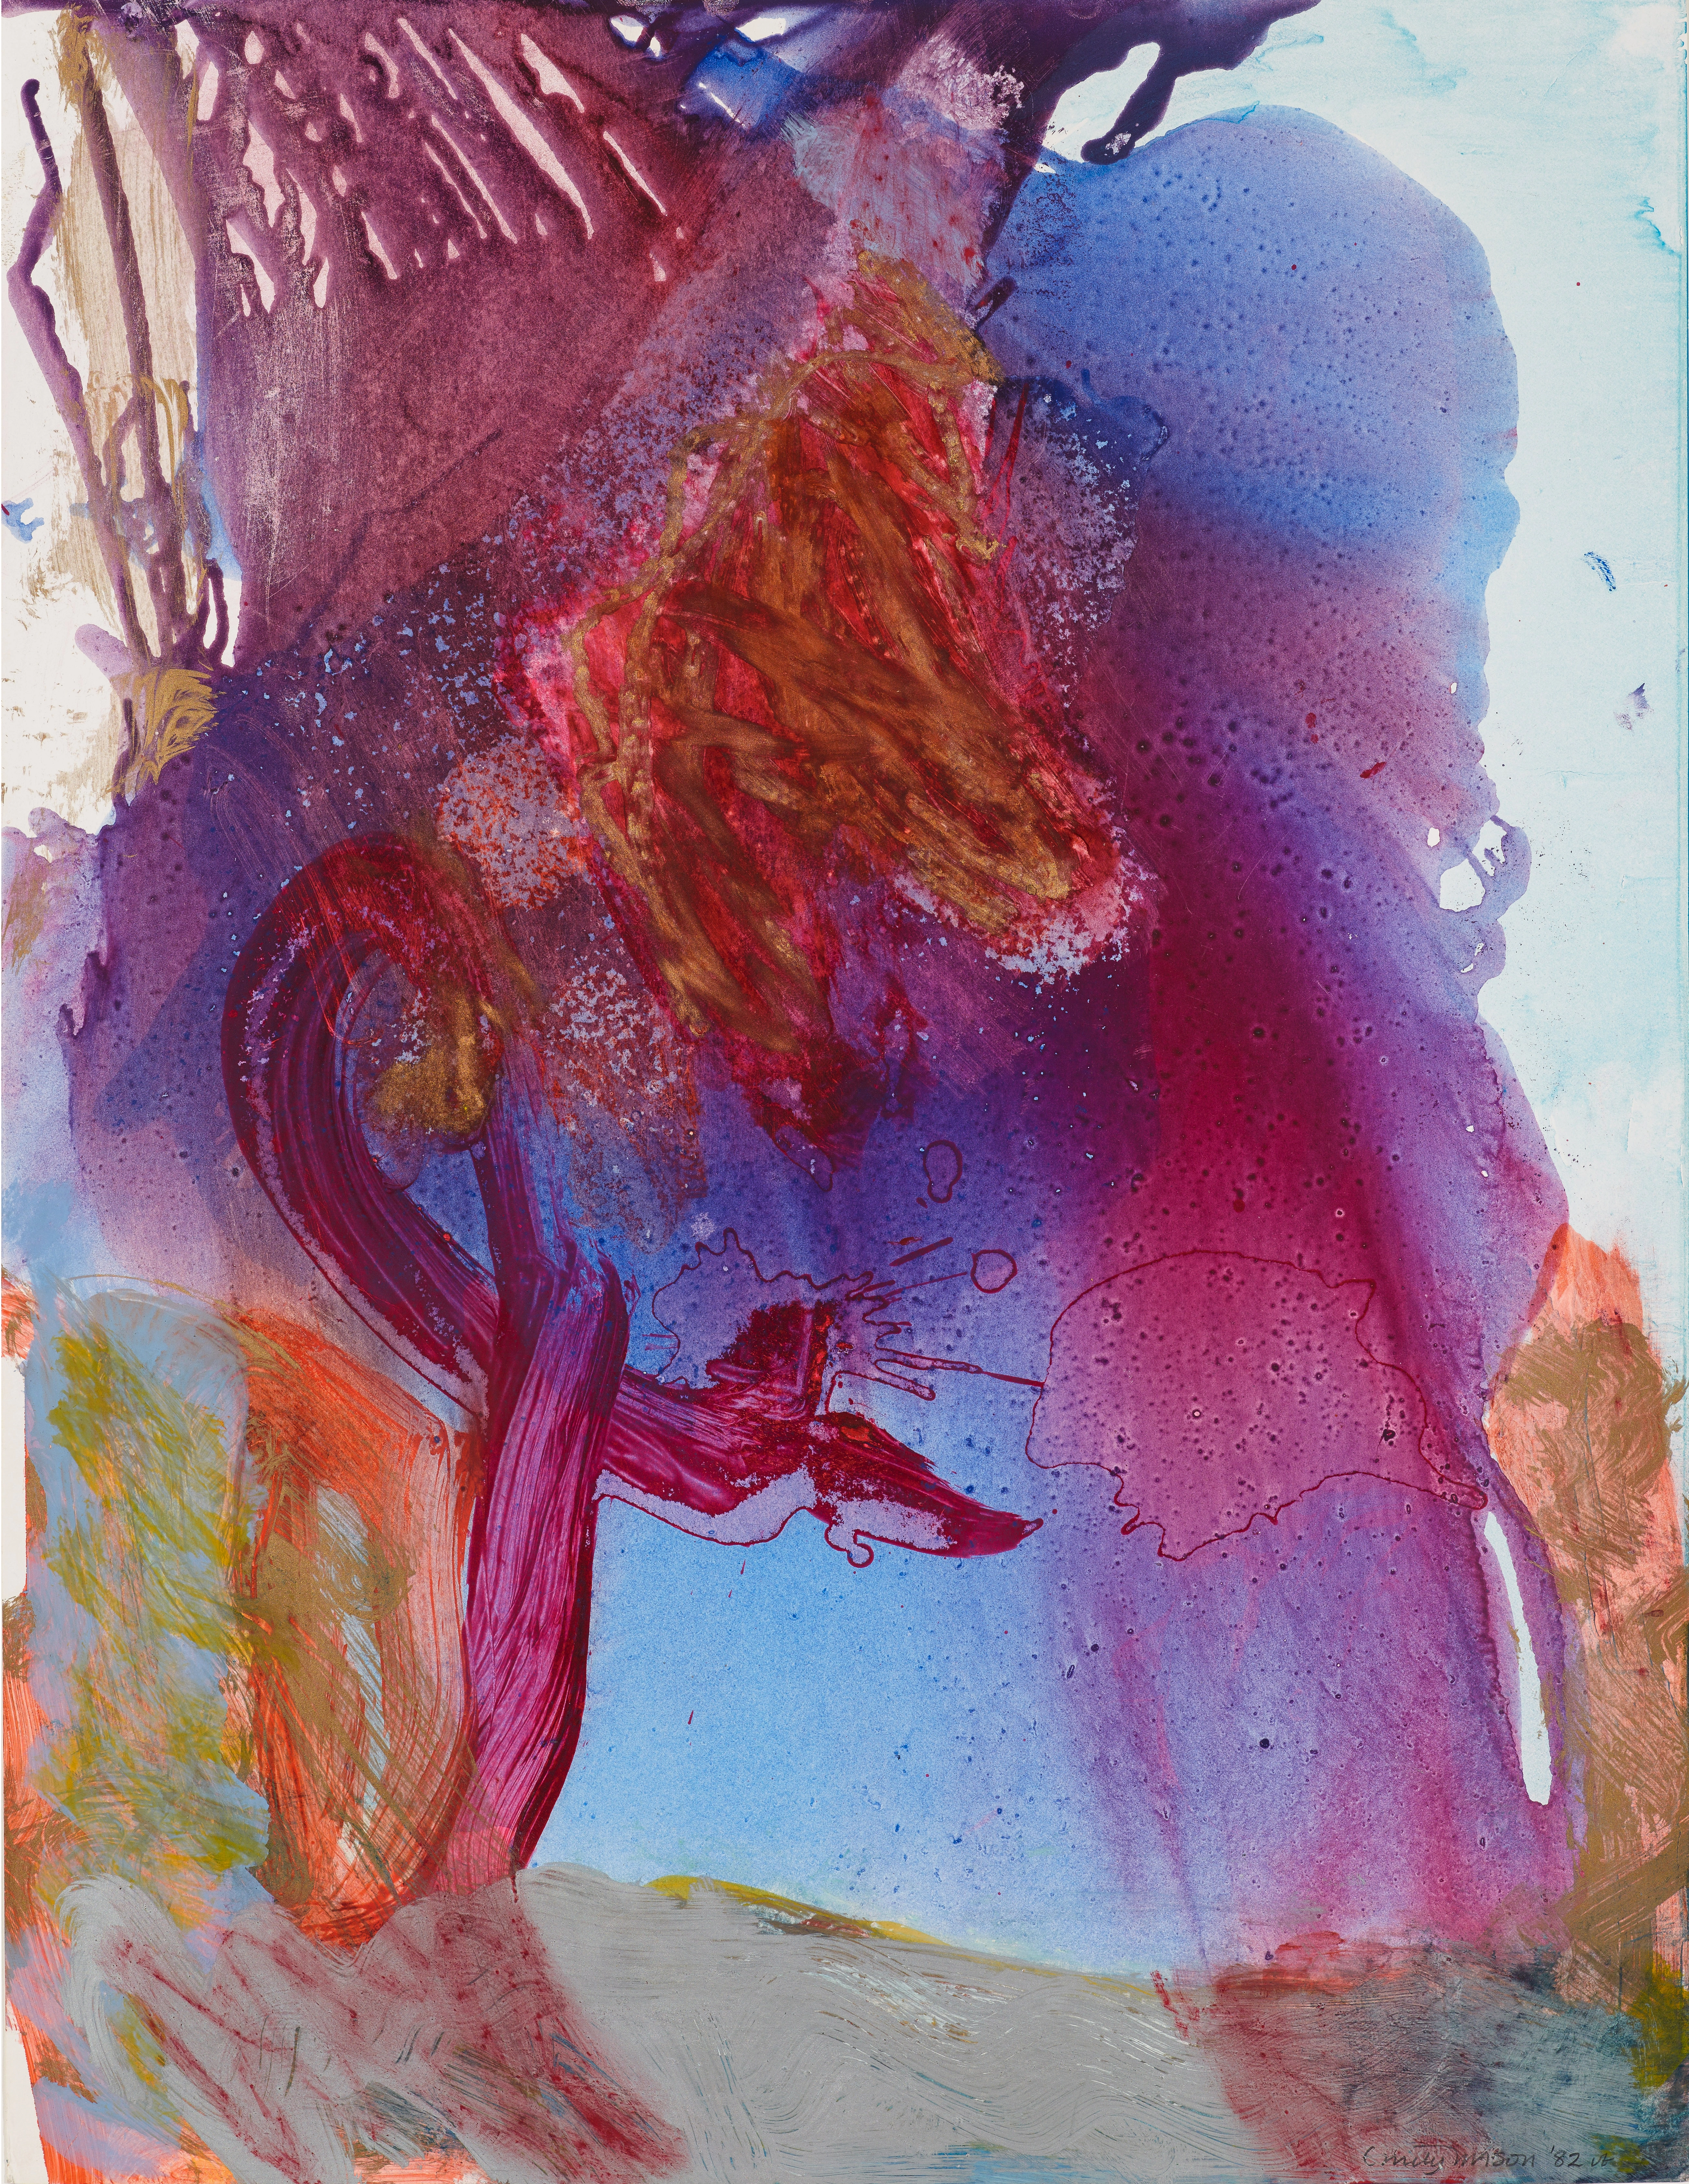 Abstract oil on paper work with bright washes and drips of blue, purple, magenta, and brown.